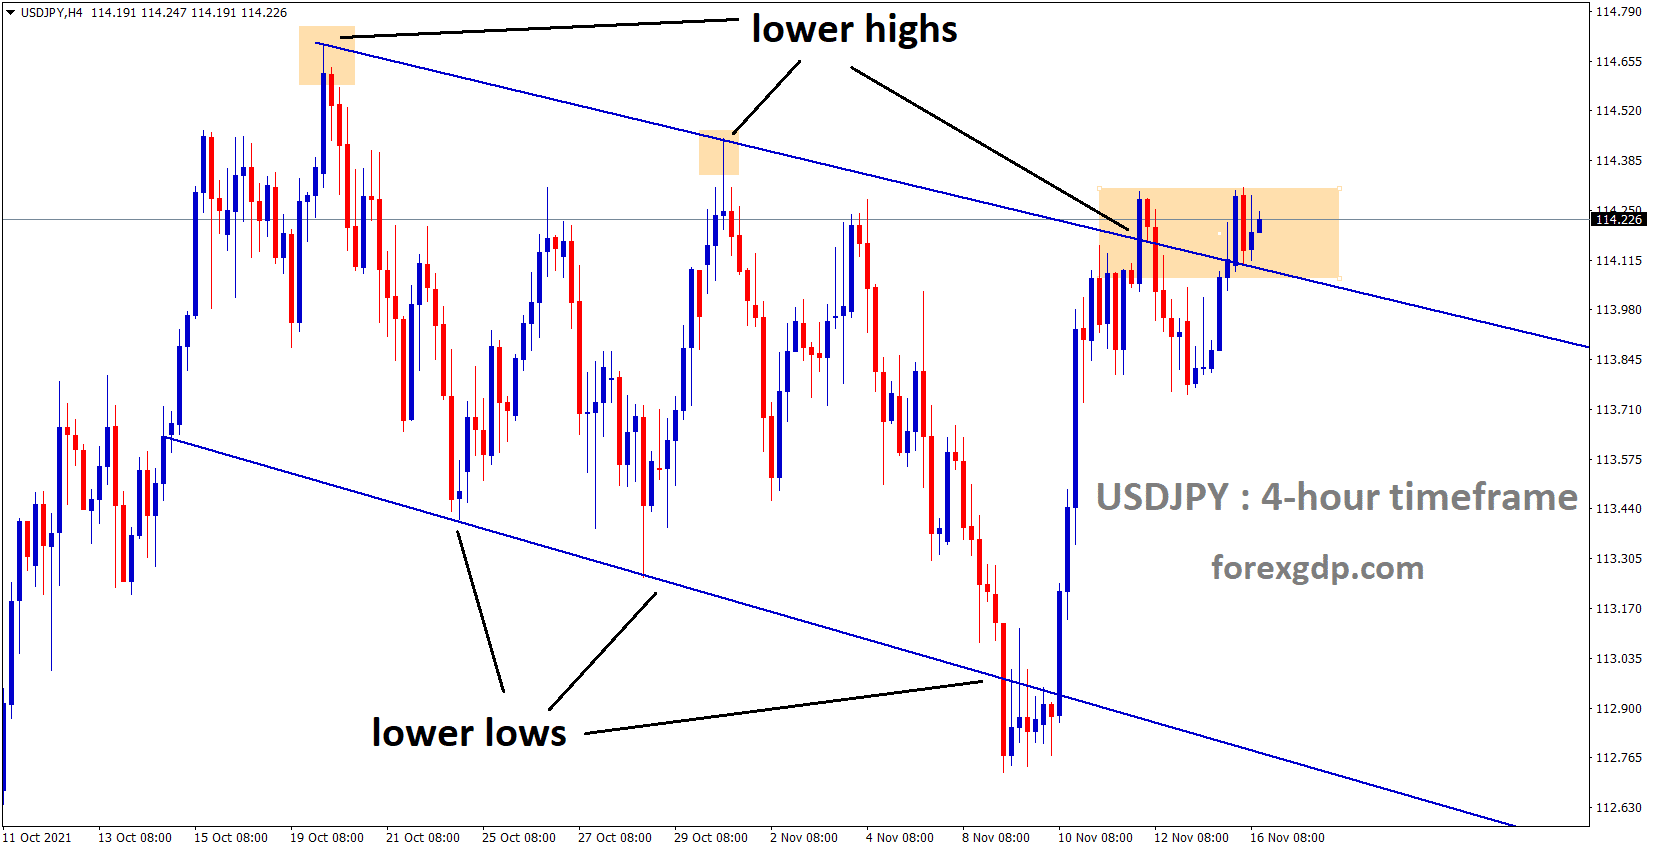 USDJPY has broken the Descending channel and market consolidated at the top of the channel